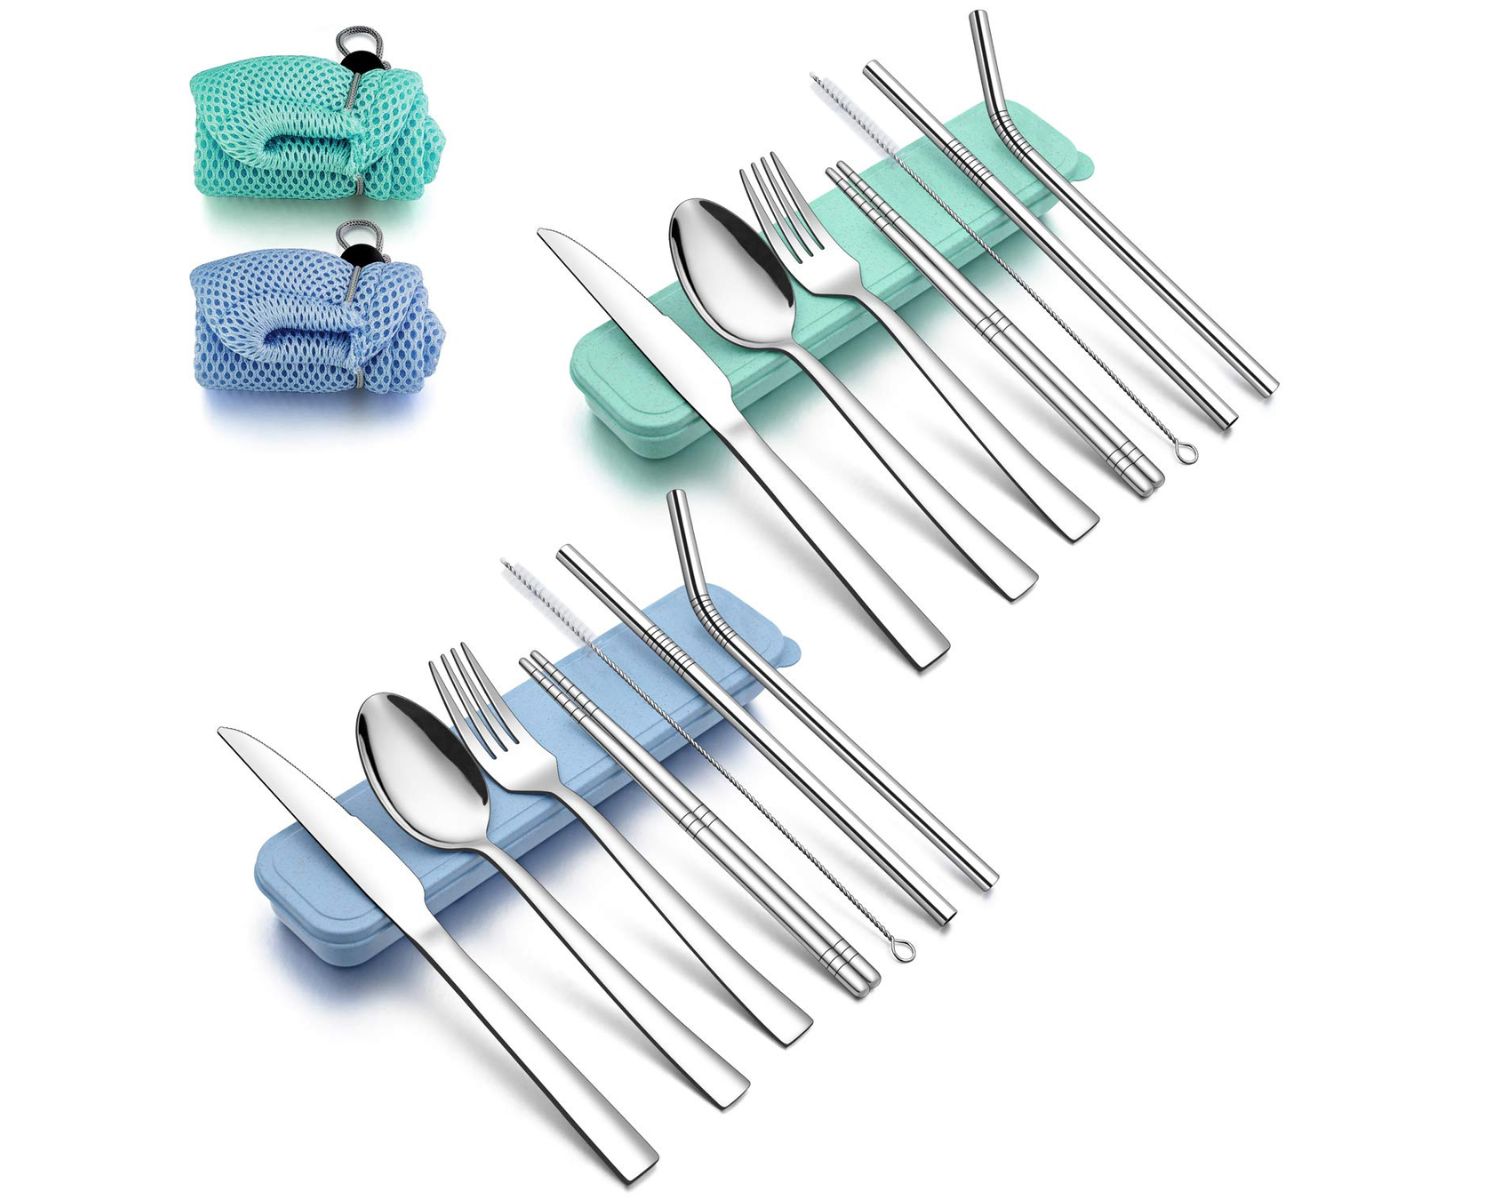 Reusable Travel Utensils Cutlery Set with Case, YIMICOO Stainless